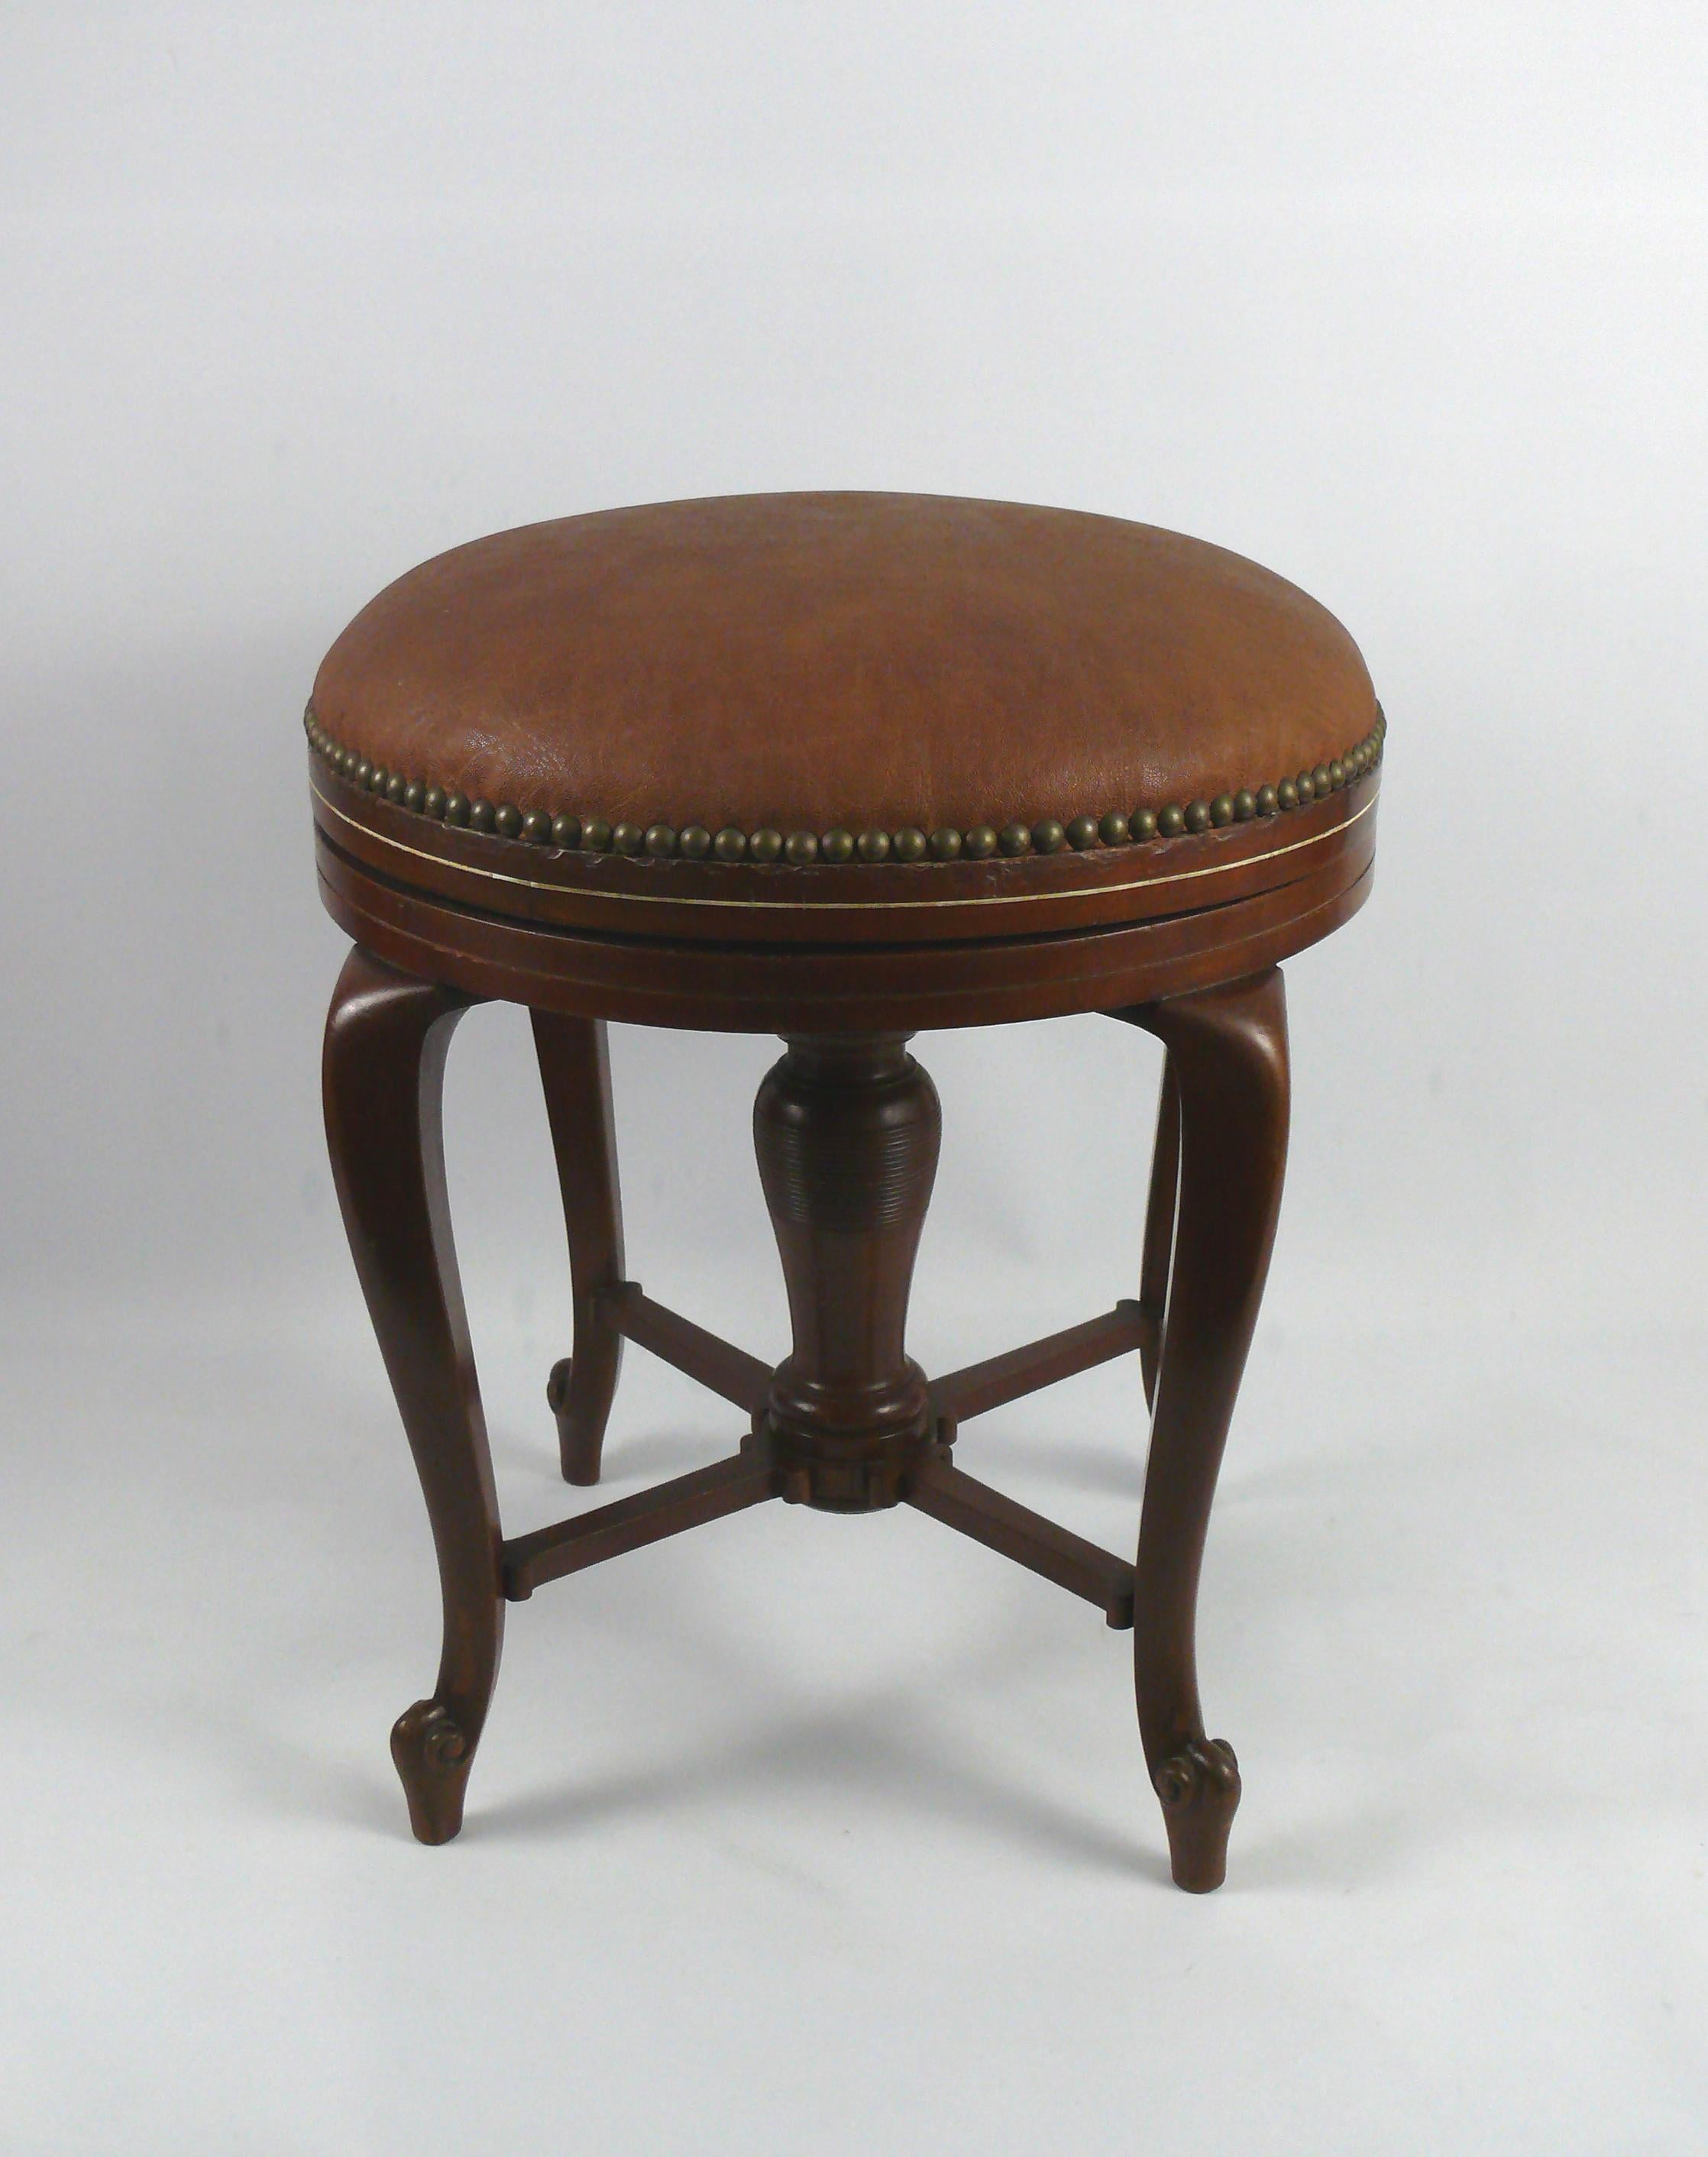 Elegant, very comfortable piano stool/swivel stool made of solid wood (walnut?) with padded leather seat. The piano stool has four curved feet that are glued into a ring at the top and glued to the turned center column with a wooden cross at the